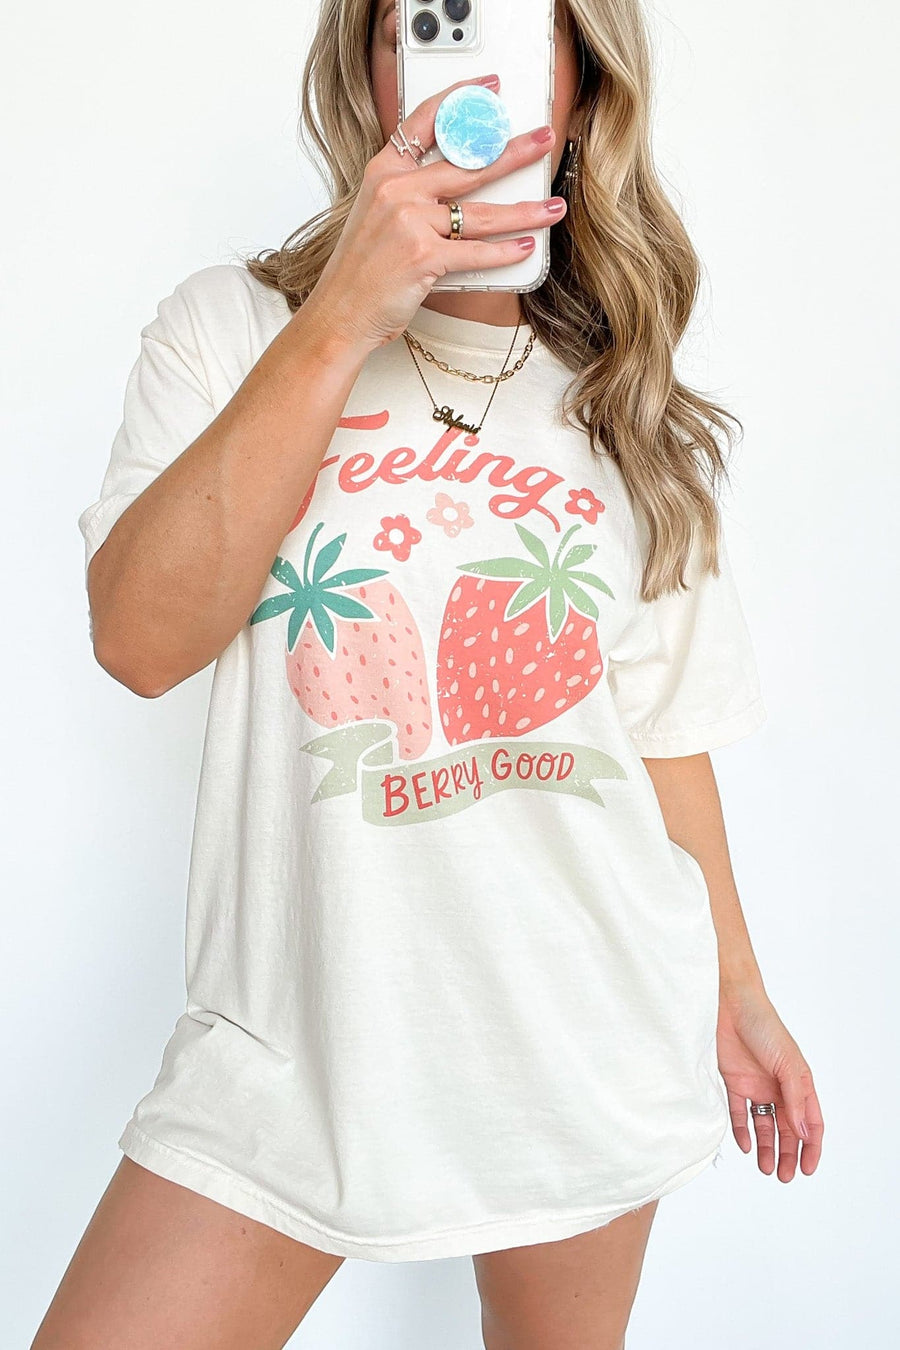  Feeling Berry Good Vintage Relaxed Graphic Tee | CURVE - kitchencabinetmagic